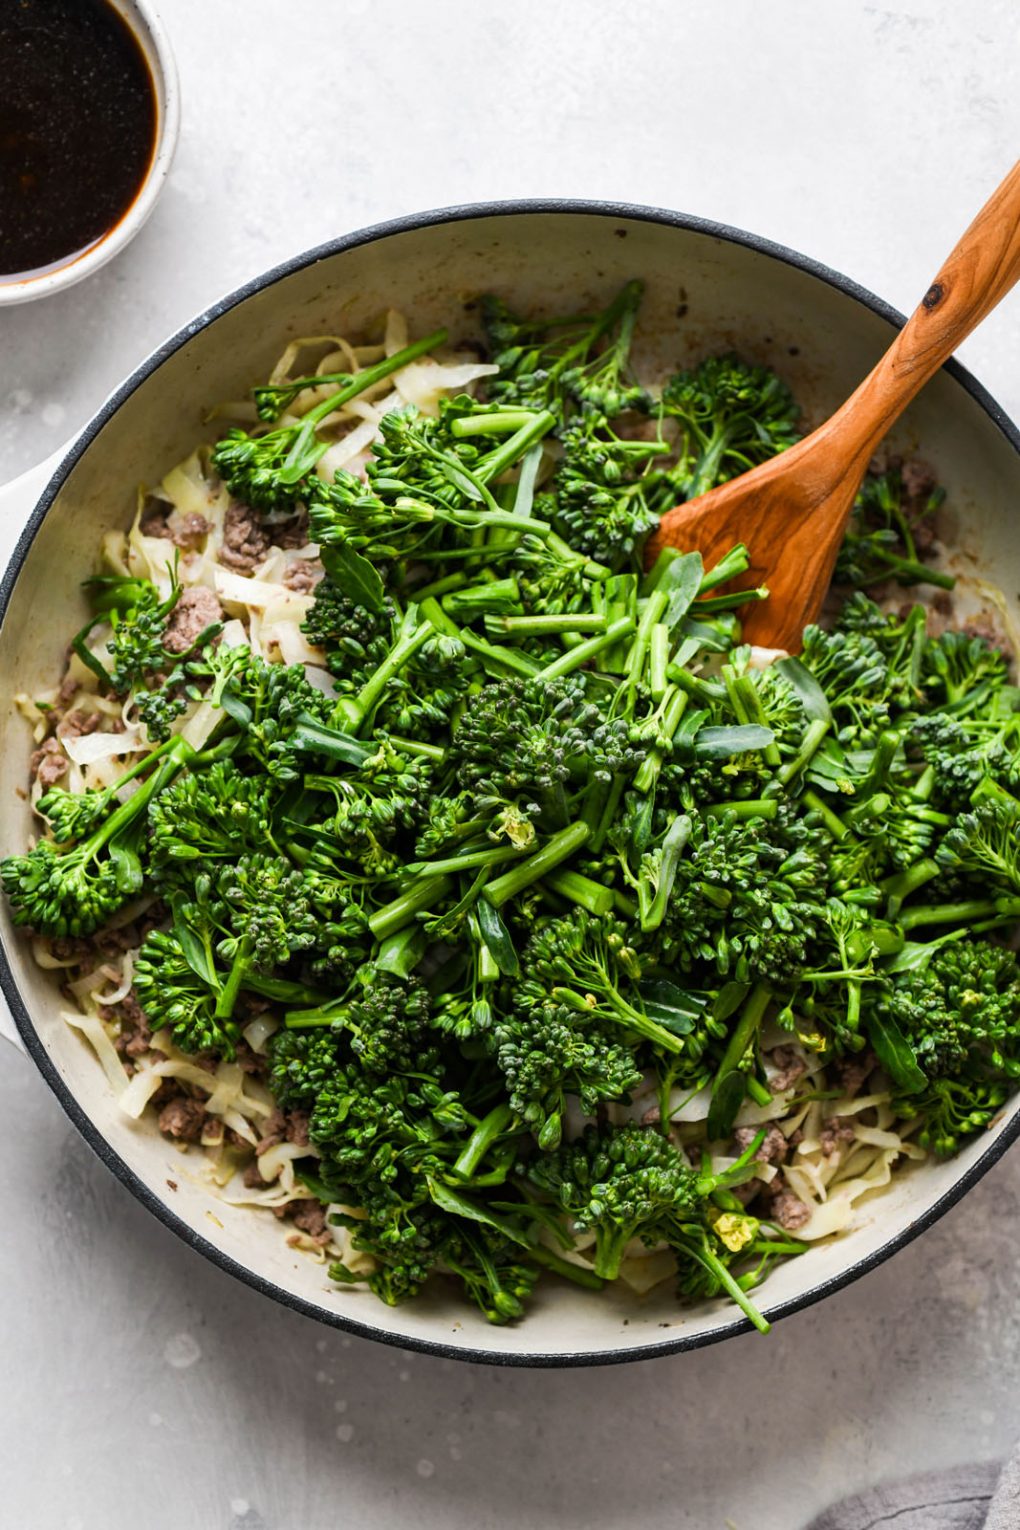 Overhead shot of a cream colored ceramic skillet filled with cooked ground beef, shallots, garlic, cooked cabbage, and piled high with fresh cut broccolini.